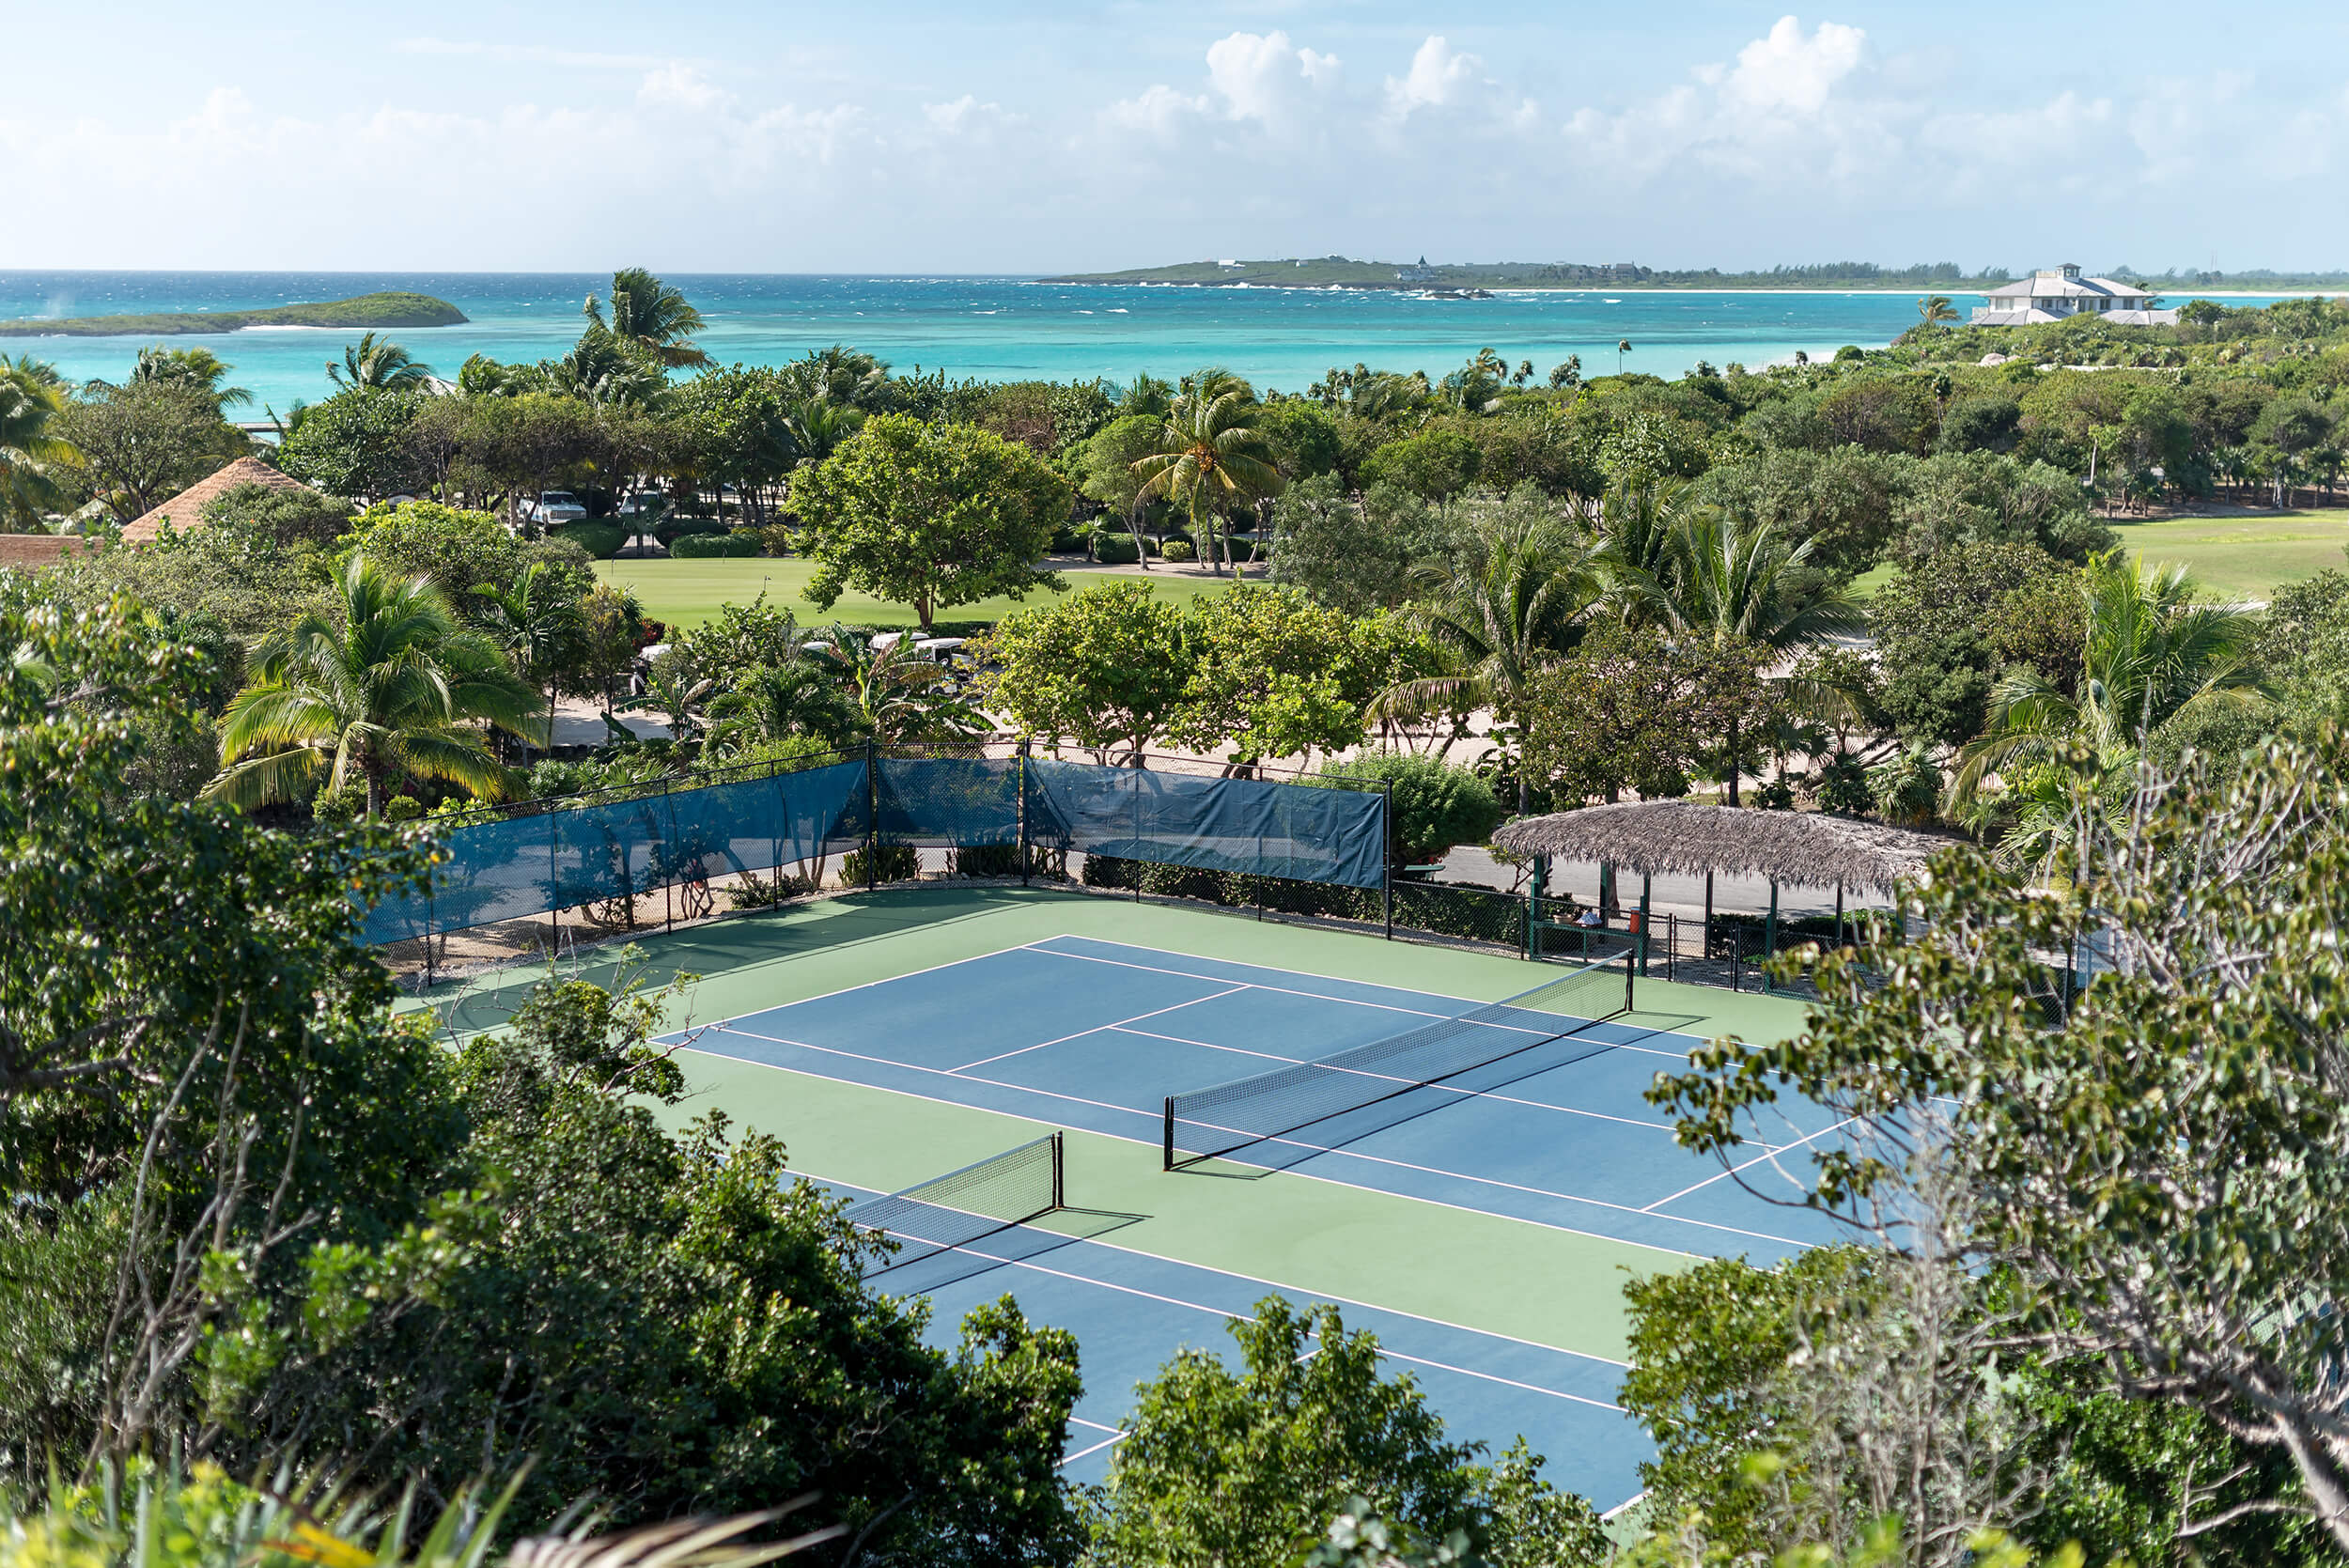 The Abaco Club Tennis Courts aerial view